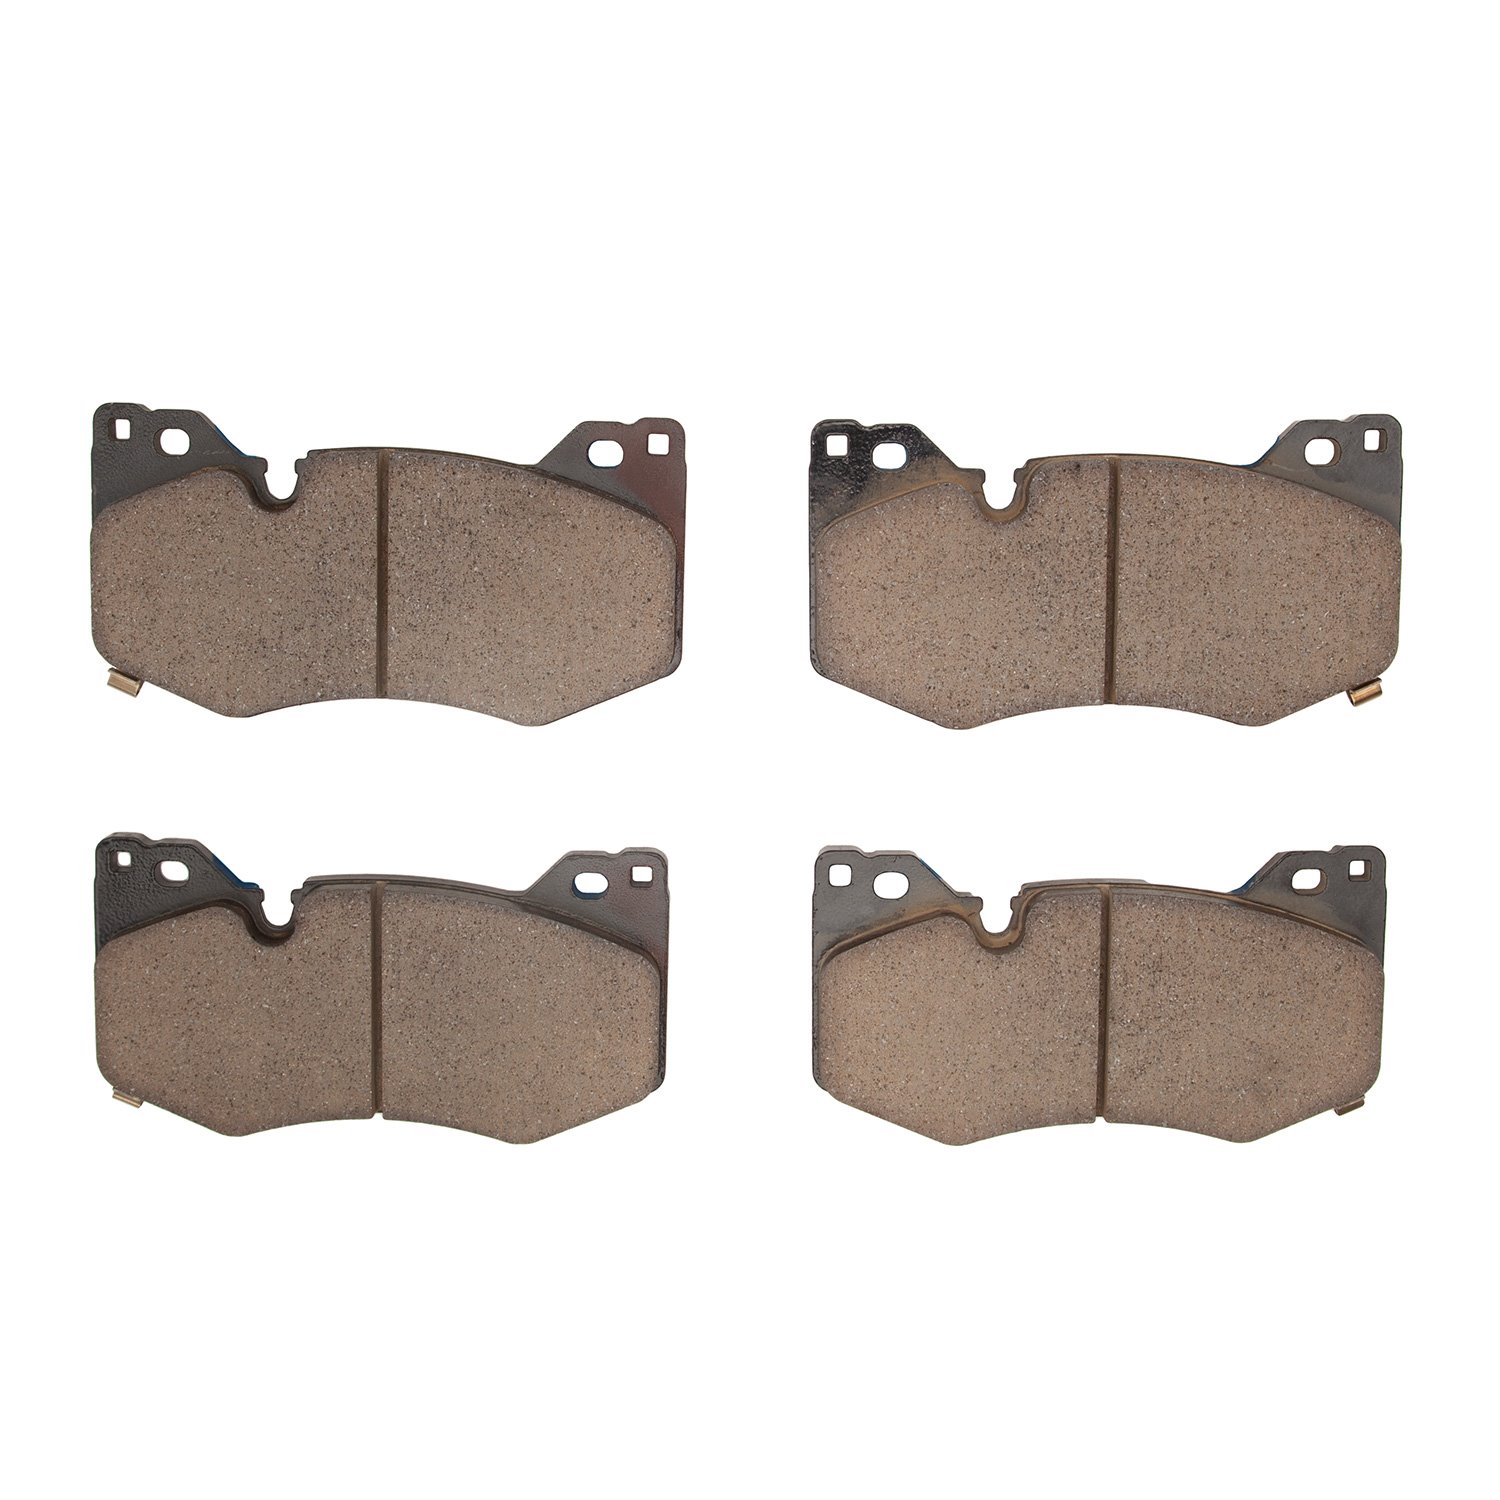 1551-2312-00 5000 Advanced Ceramic Brake Pads, Fits Select GM, Position: Front